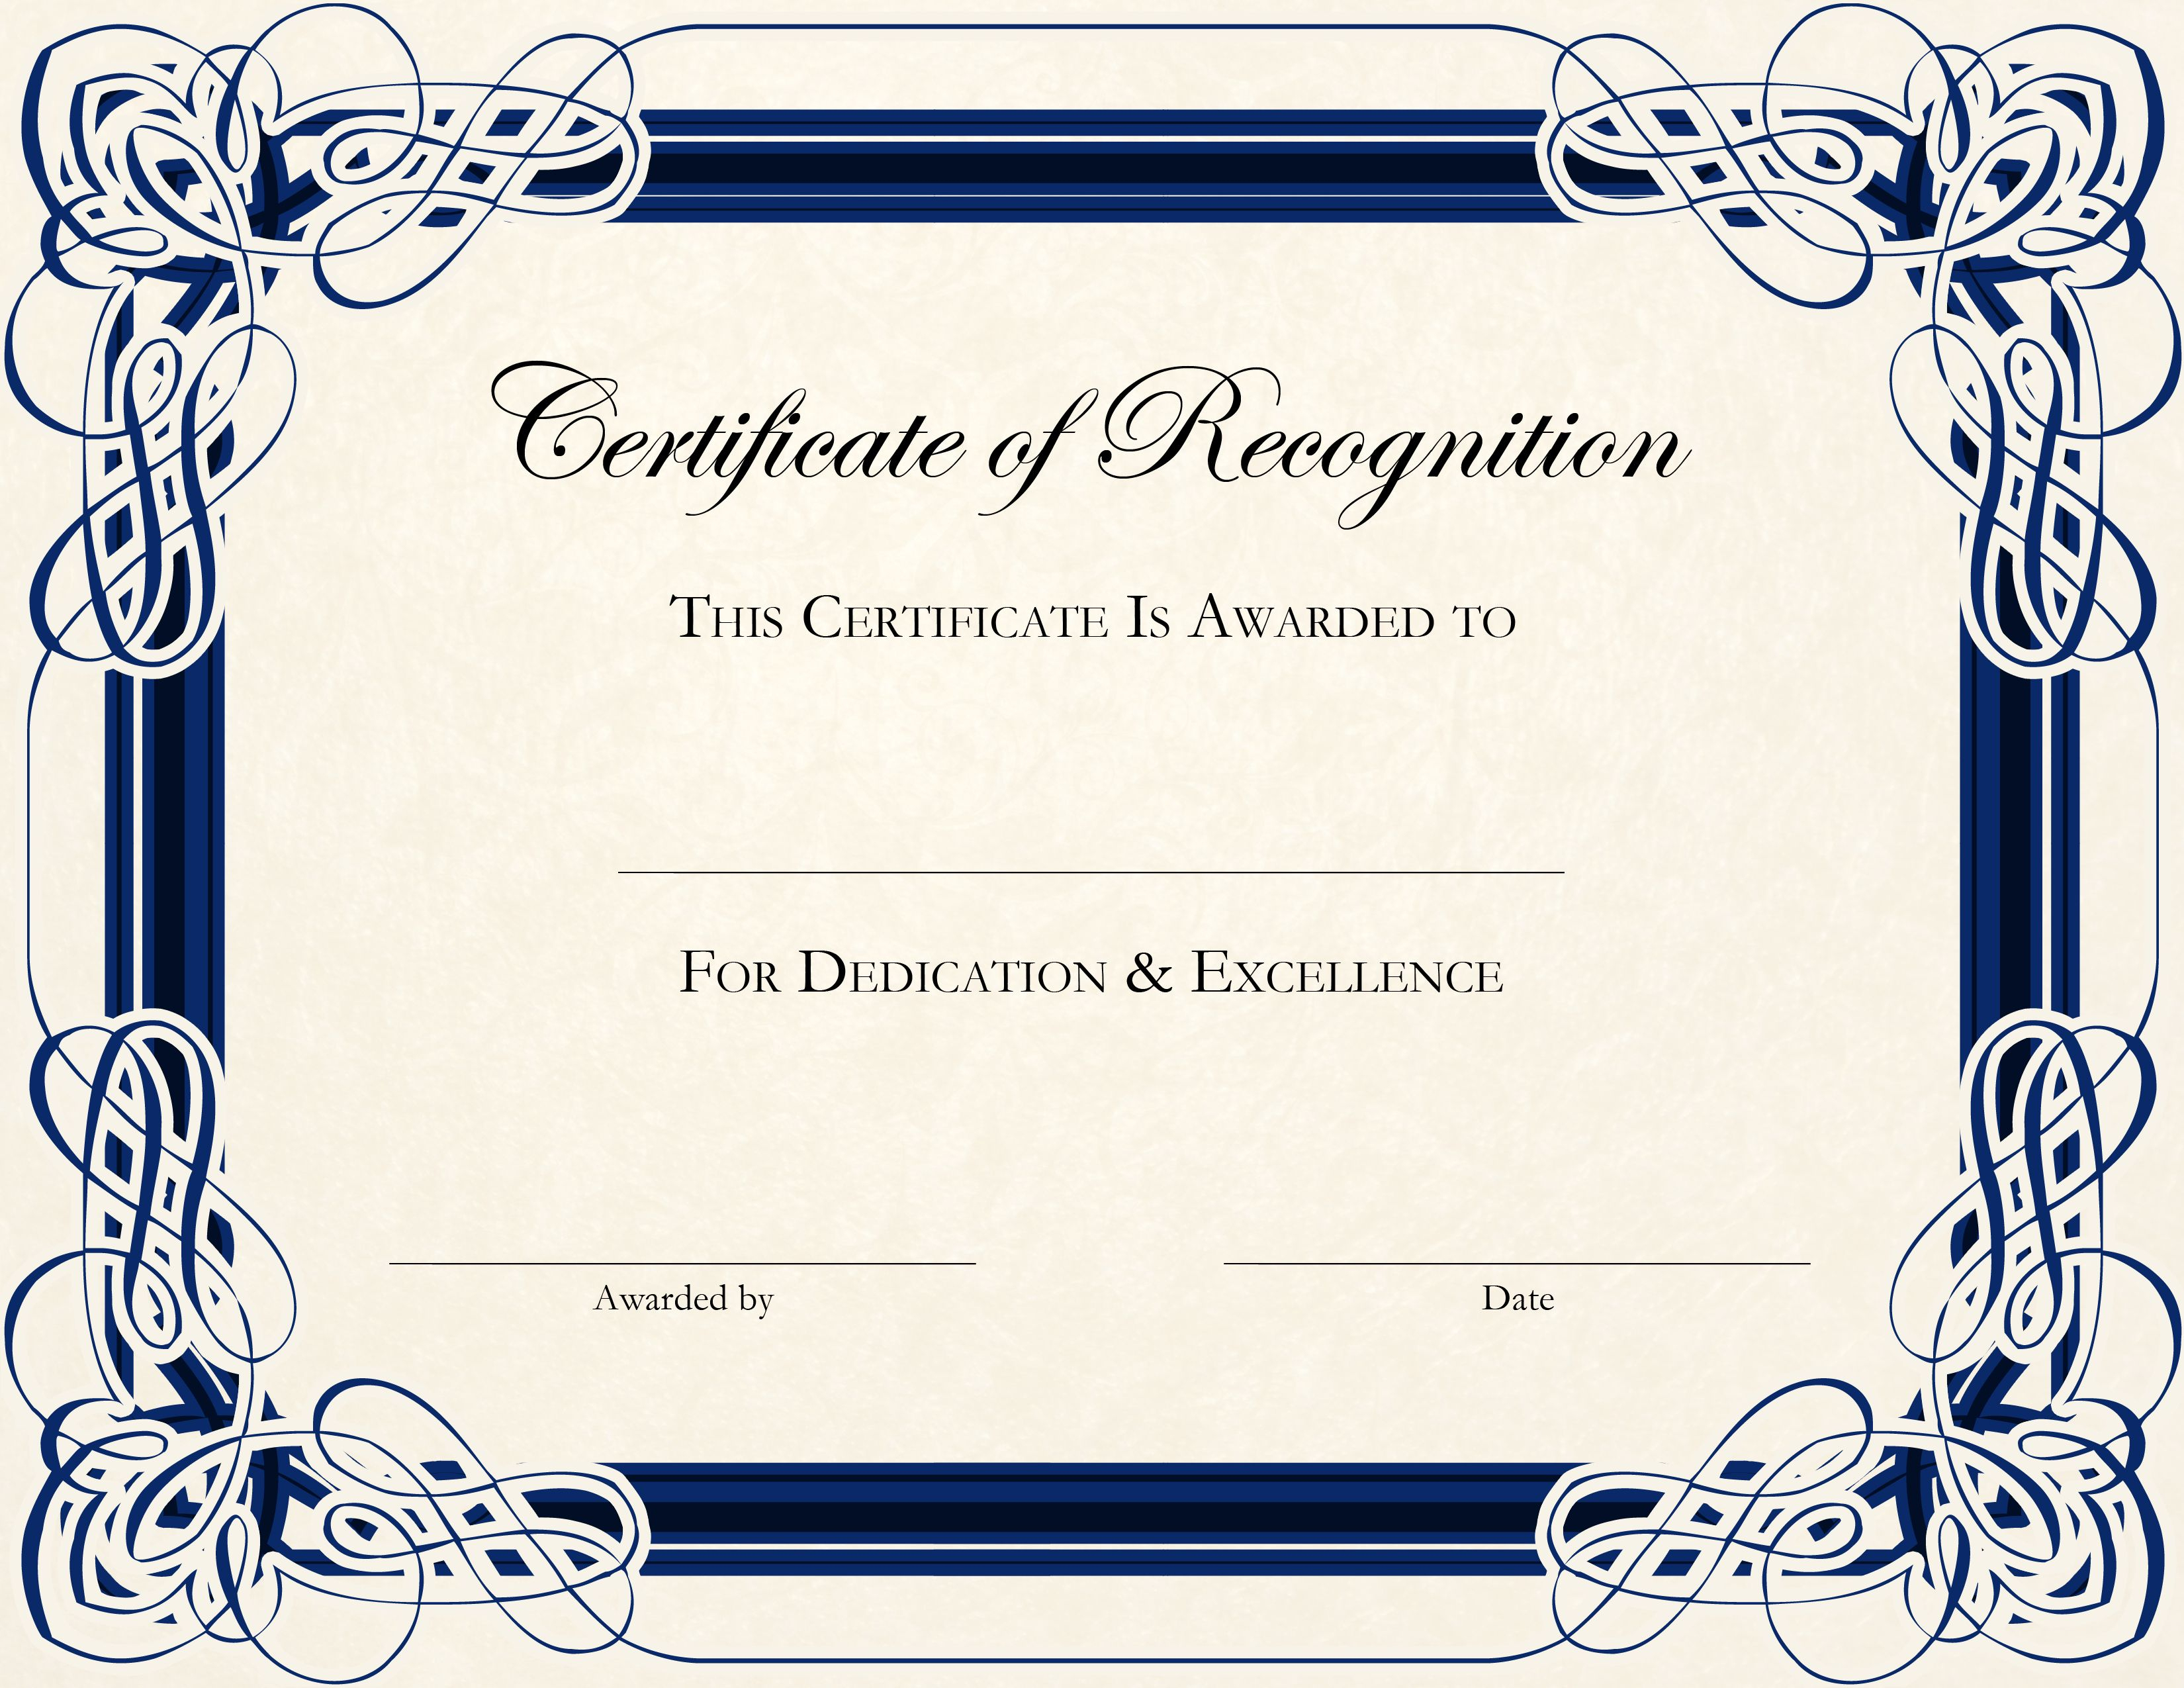 Pinsuzanne Poliner On Lenny | Pinterest | Certificate Of - Free Printable Templates For Certificates Of Recognition